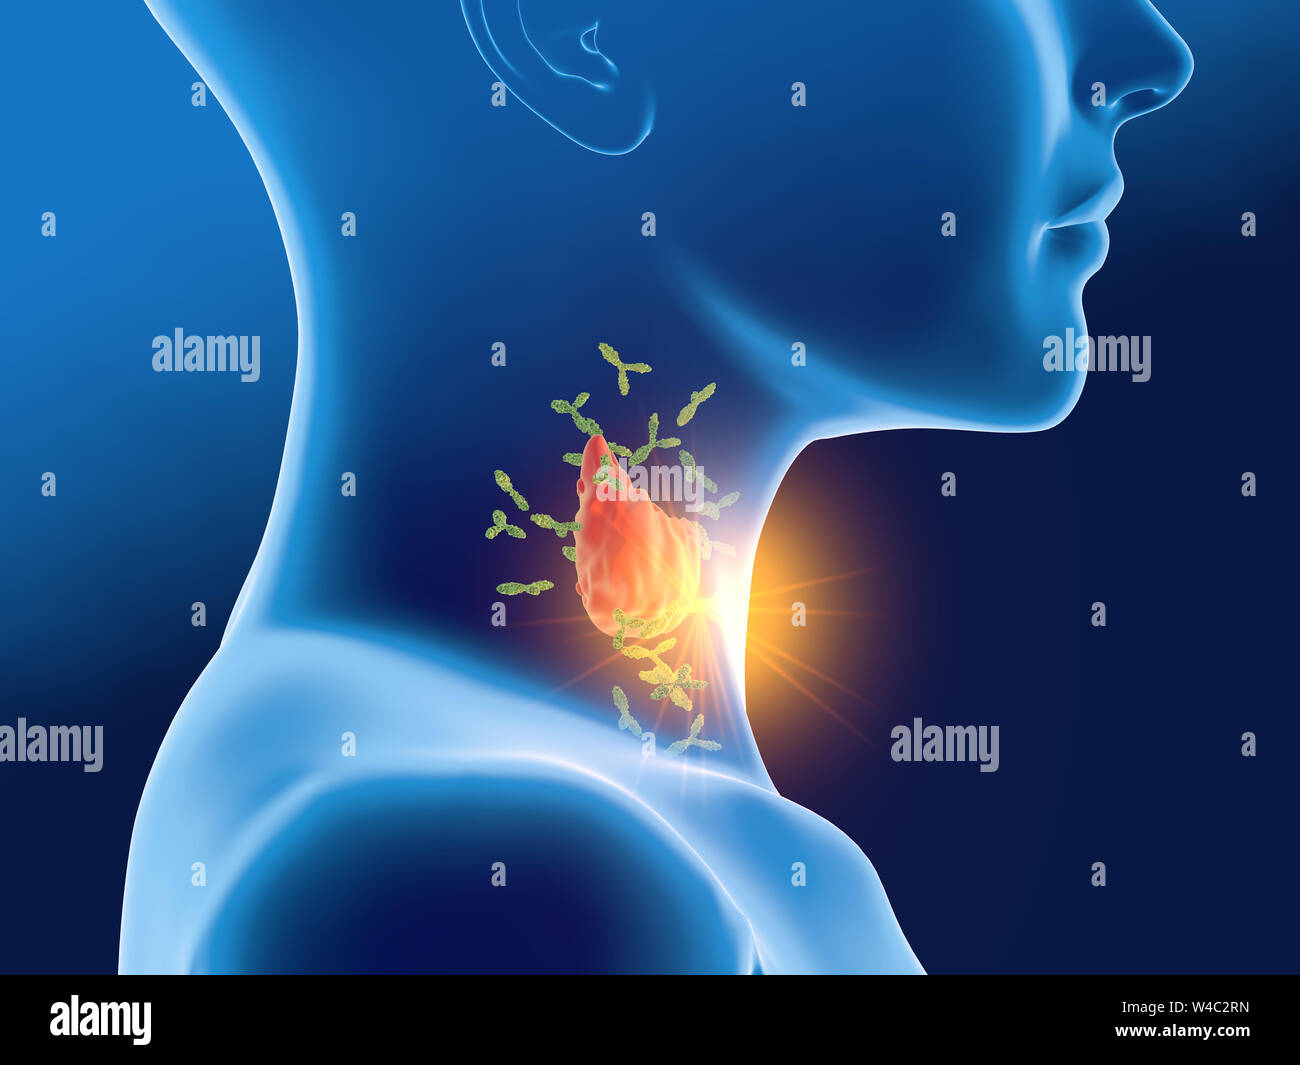 Thyroiditis Hi Res Stock Photography And Images Alamy